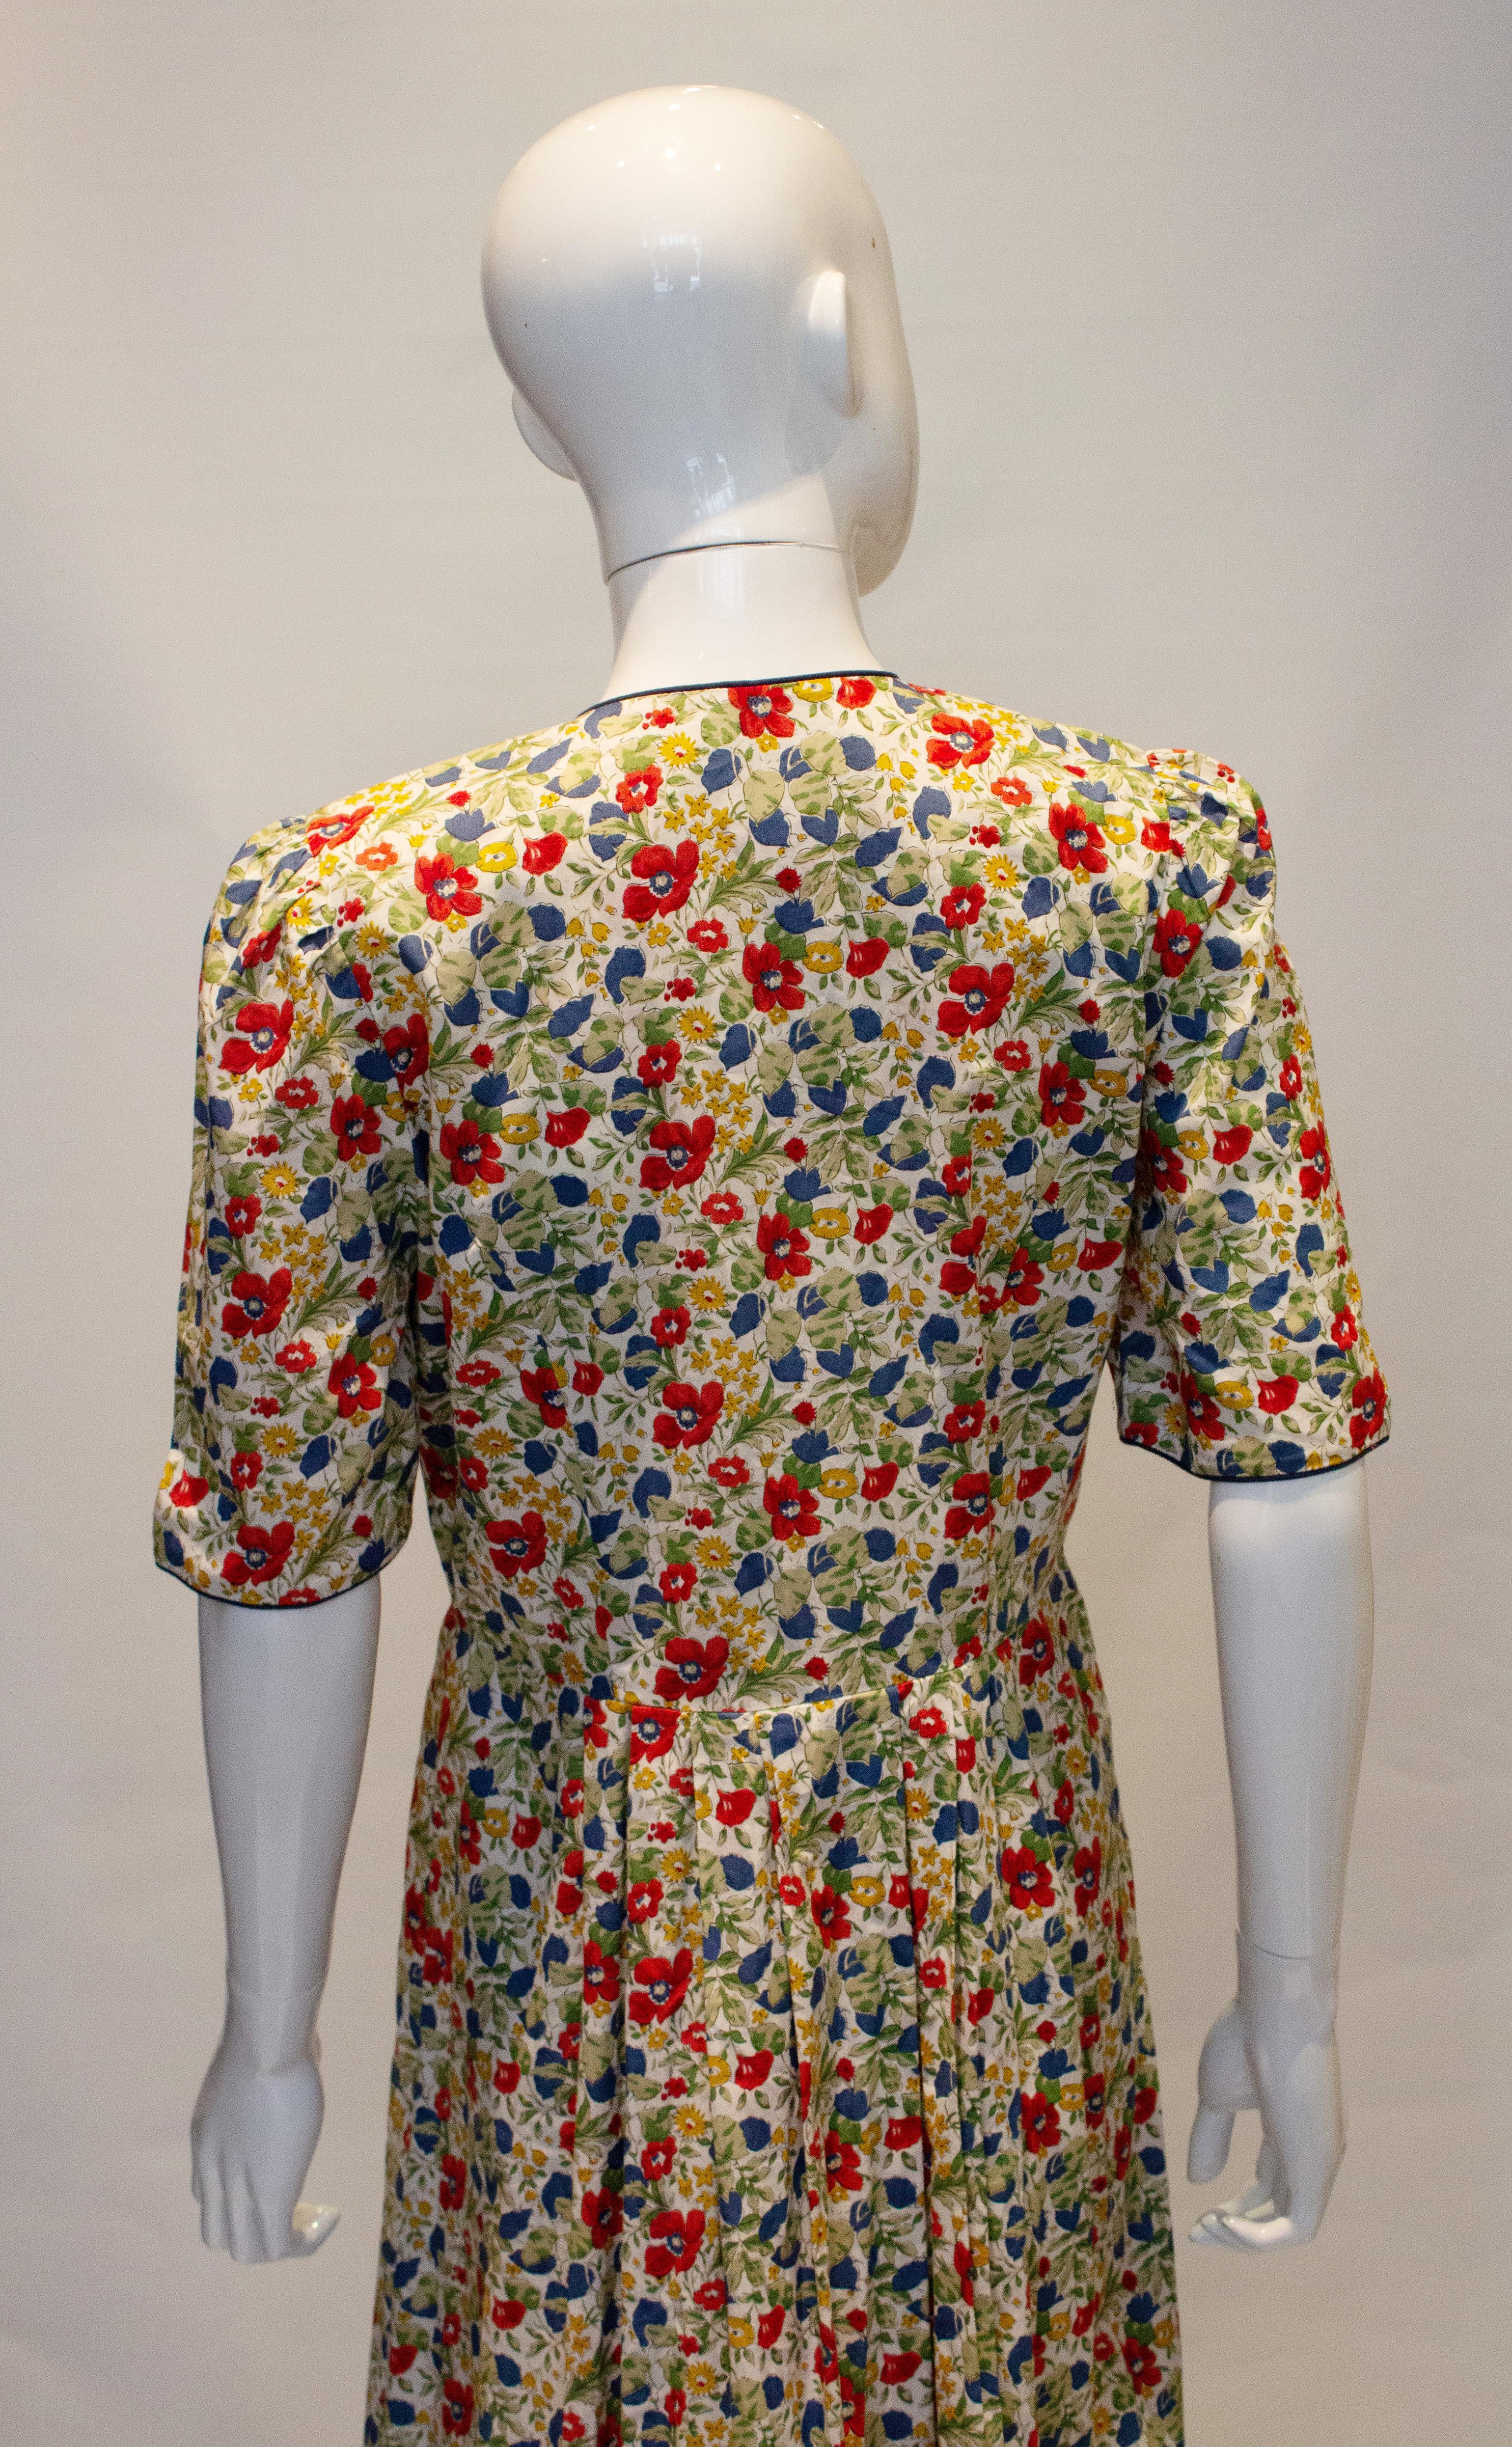 A pretty vintage cotton dress by Liberty.  The dress is in a floral print with as blue trim. It has a button from opening, with two pockets and pleats at the waist. 
Measurements : Bust up to 40'', waist 31'', length 50''